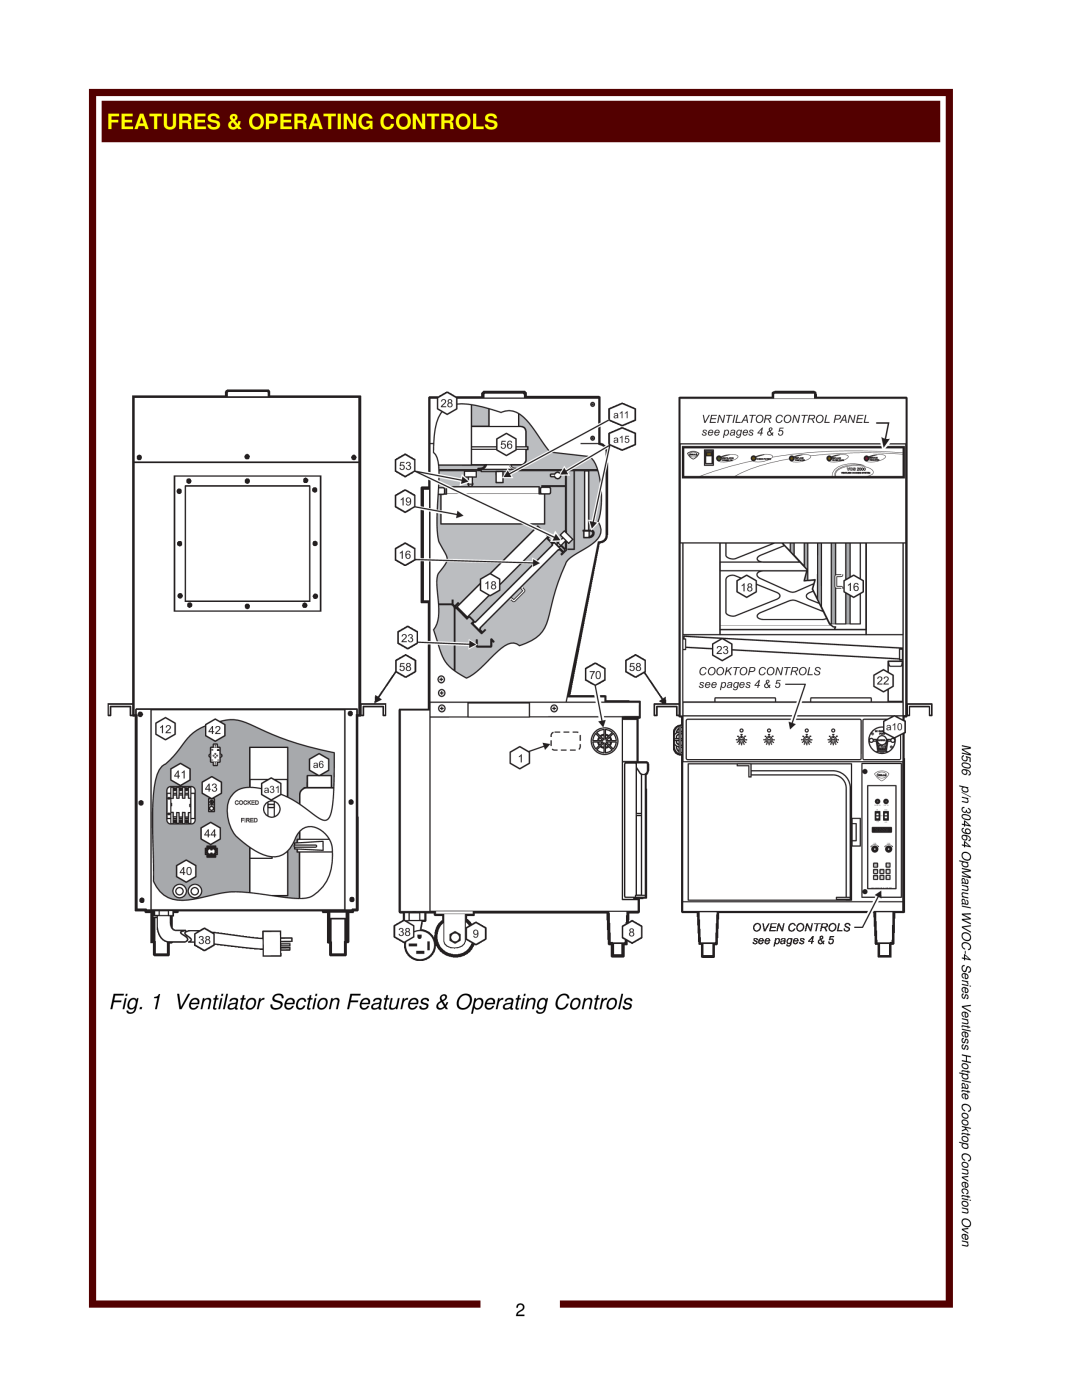 Wells WVOC-4HS operation manual see pages, Cooktop Controls, Oven Controls, M506 p/n 304964 OpManual WVOC-4Series 